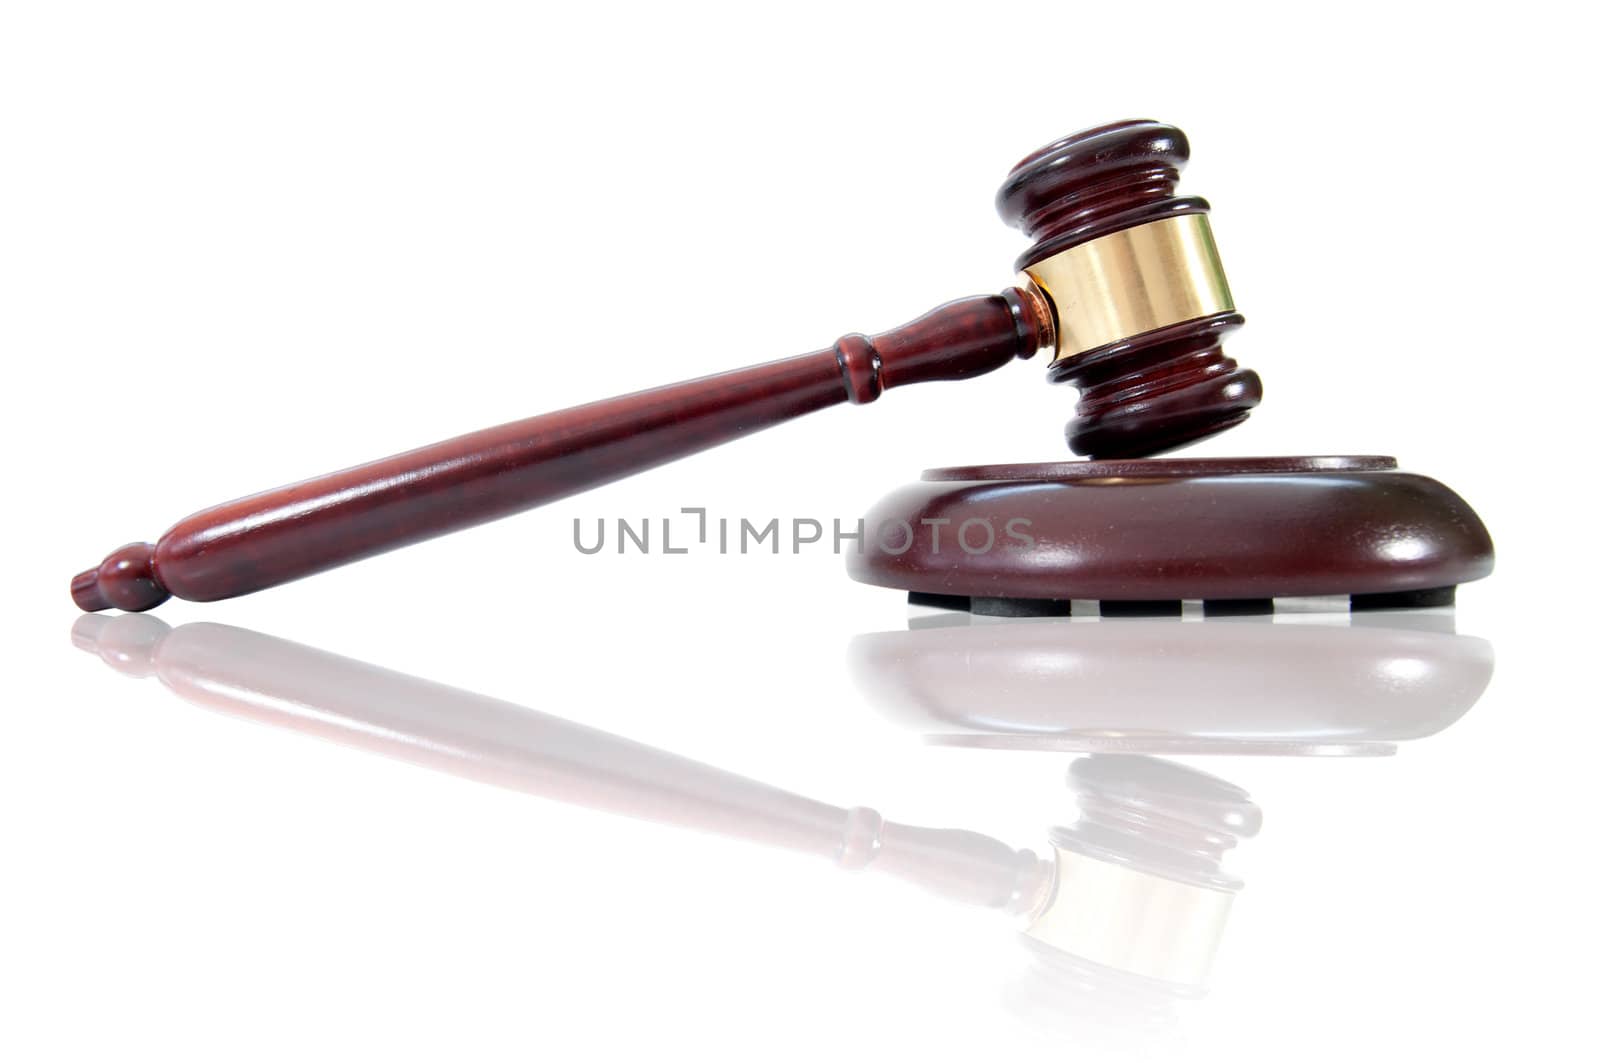 Gavel with reflection against a white background